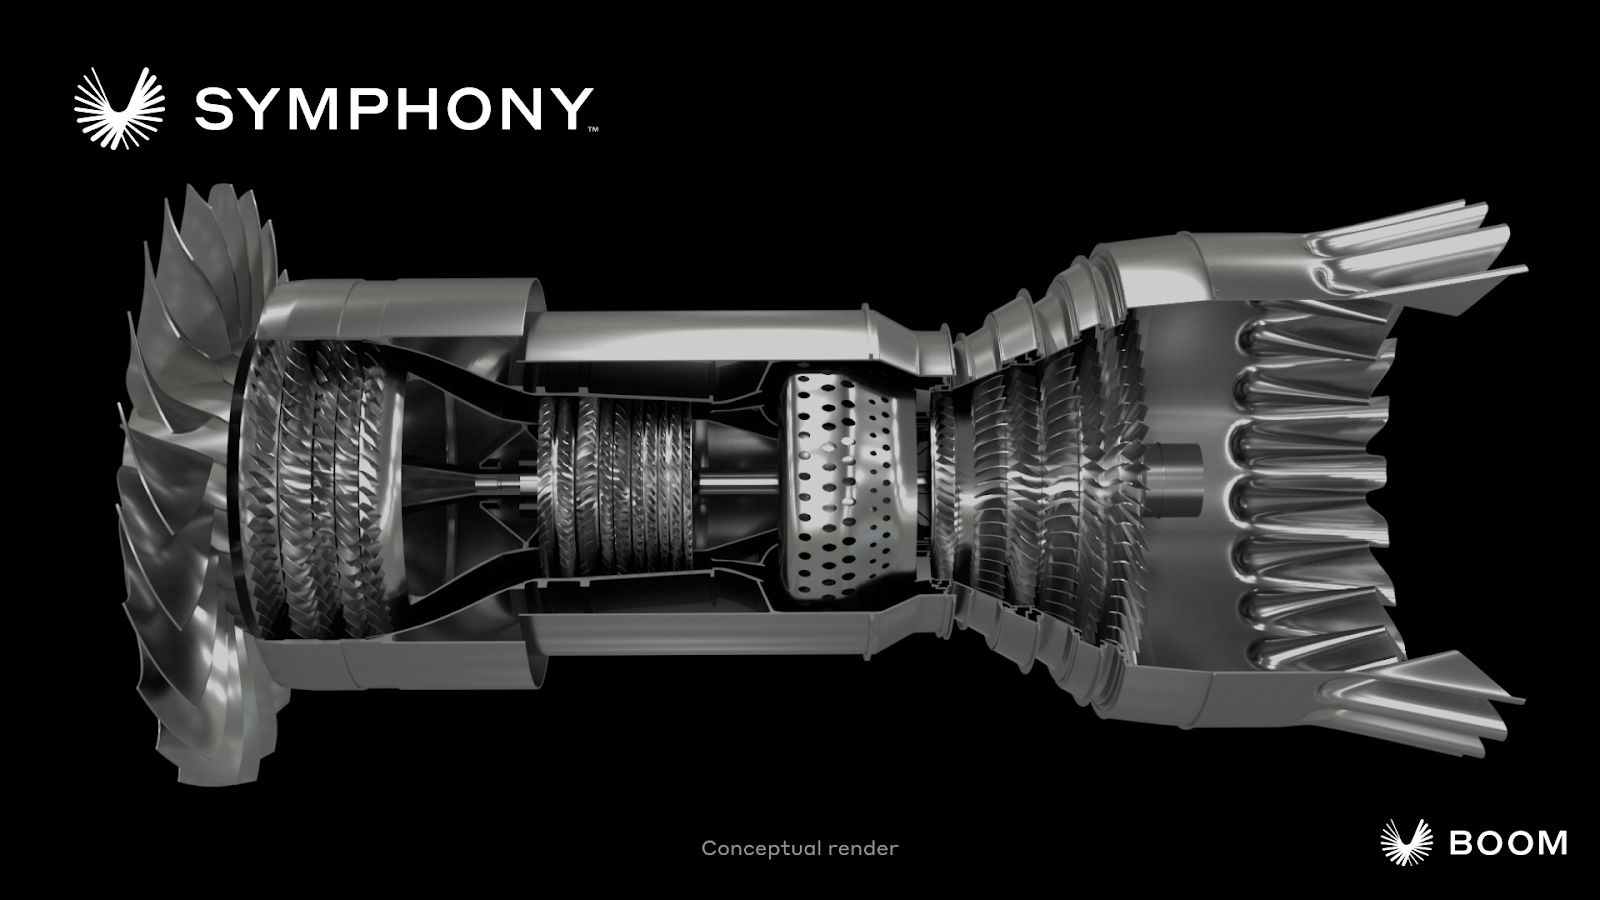 Boom takes the wraps off its supersonic Symphony engine design | TechCrunch